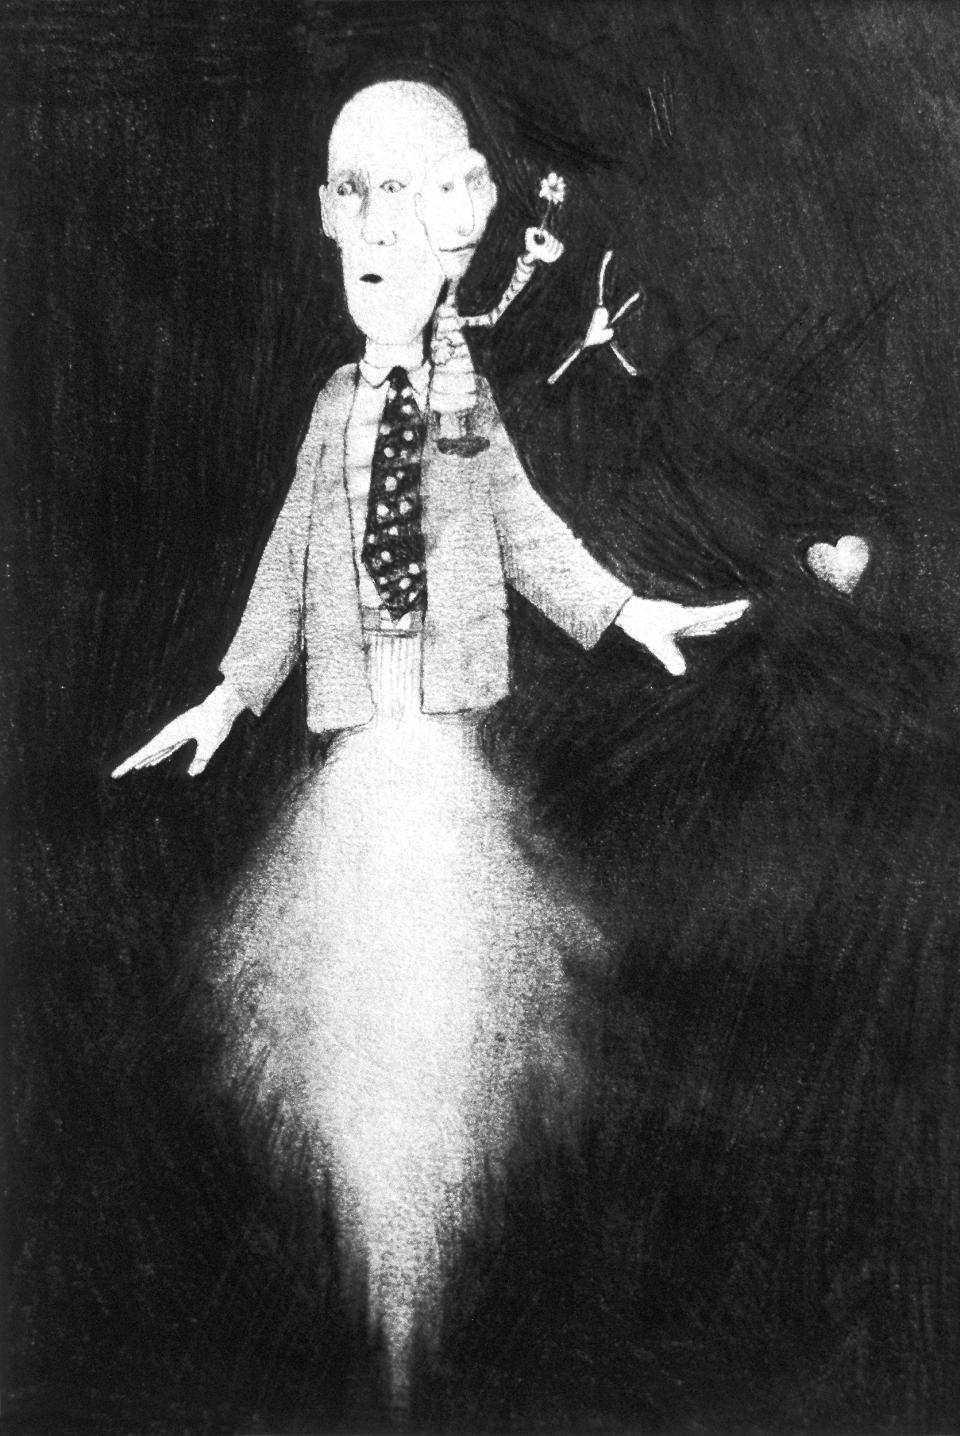 The Resurrection of Mr Normal  1990  pencil on paper  21 x 15 cm  SOLD